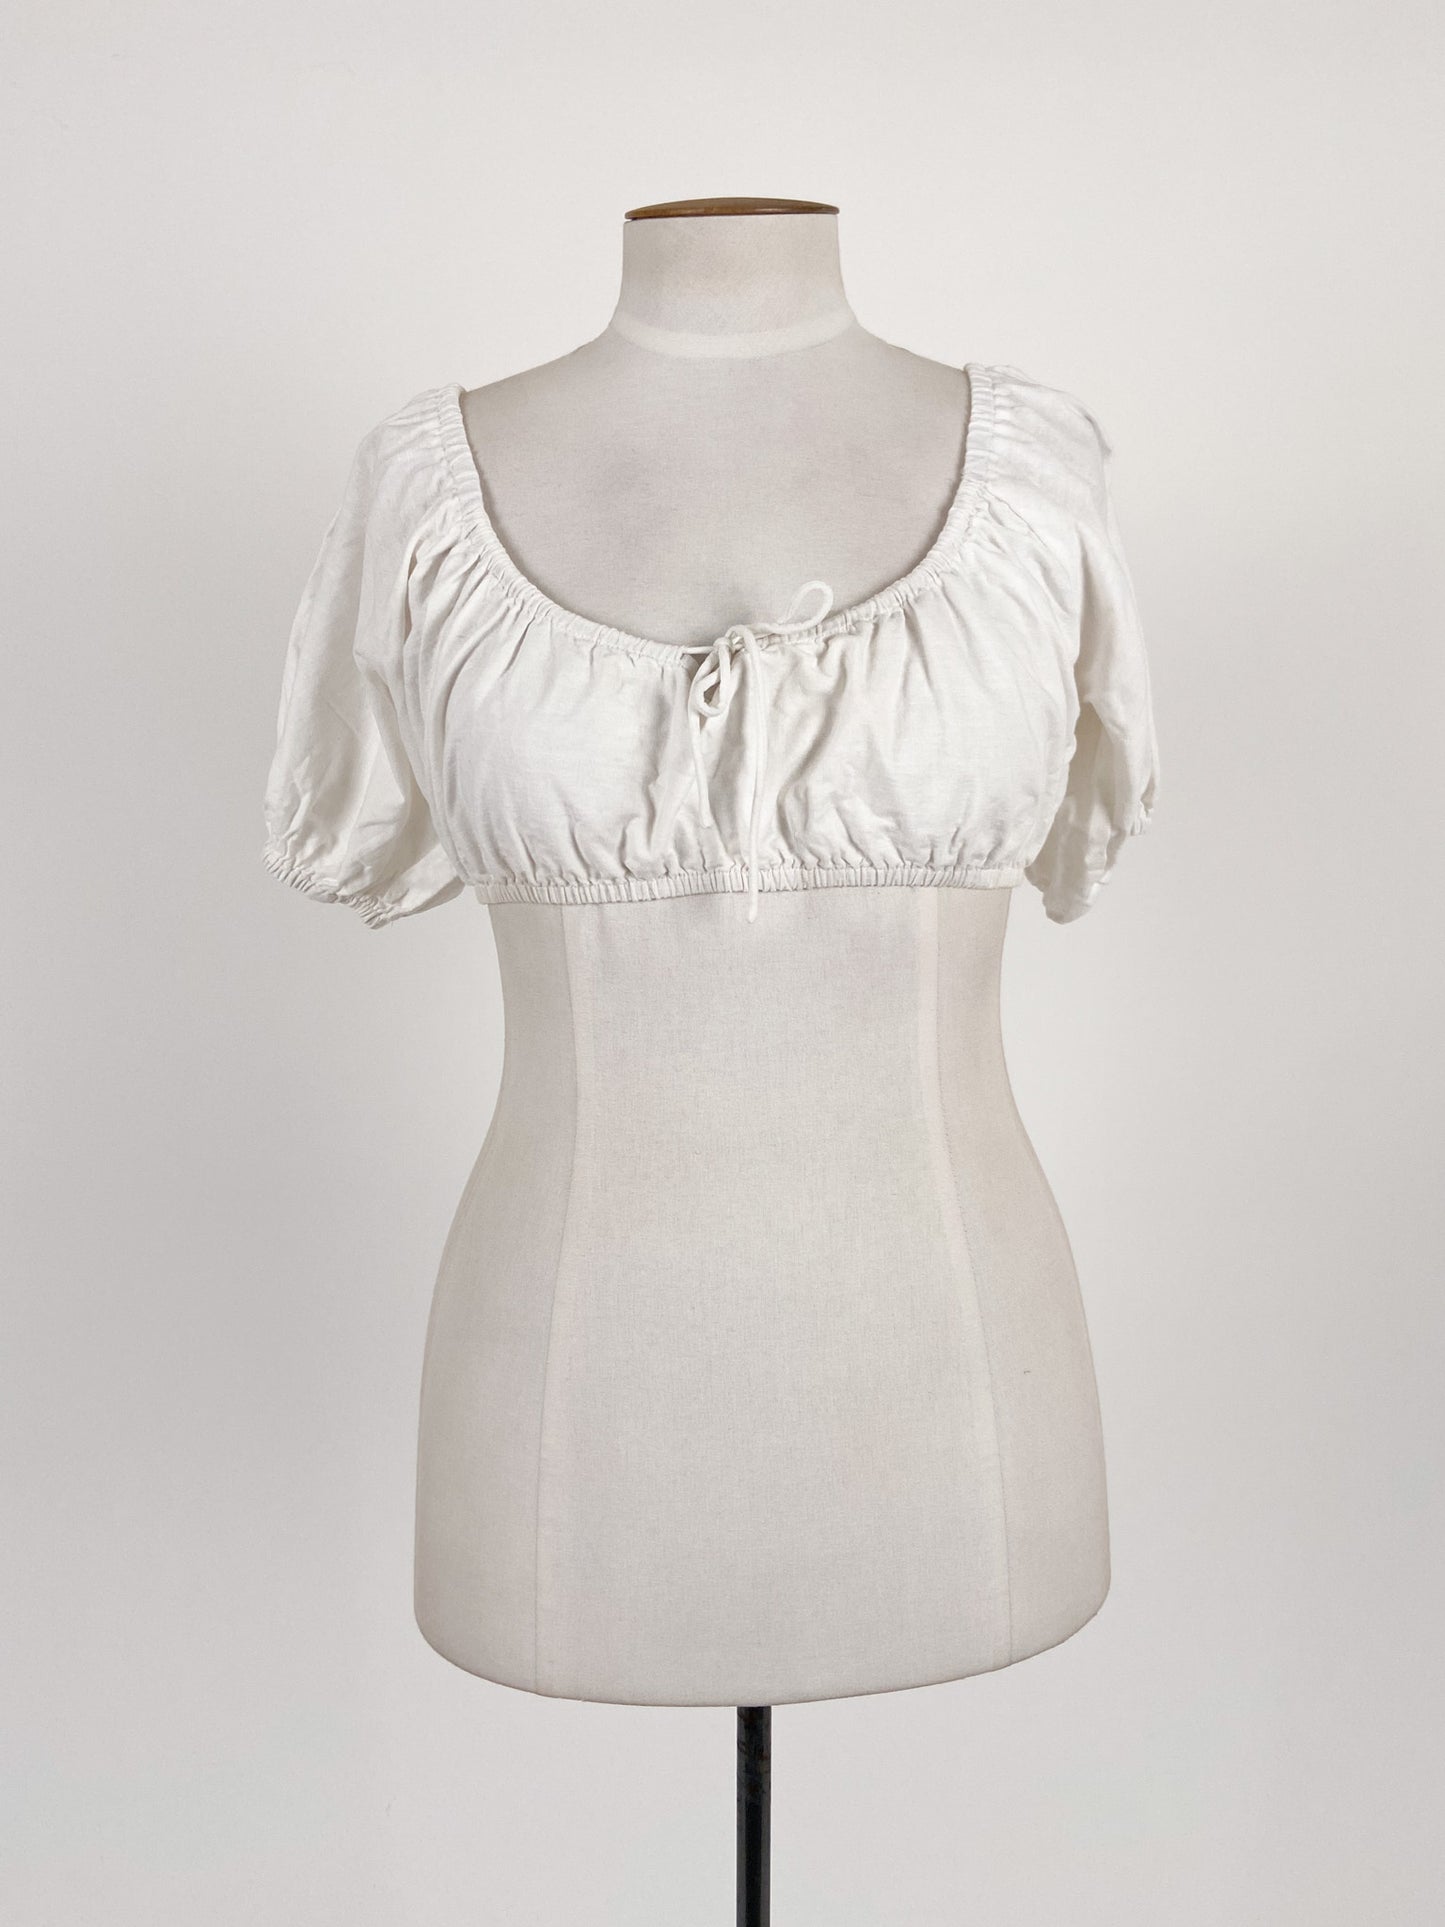 Sabo | White Casual/Cocktail Top | Size M